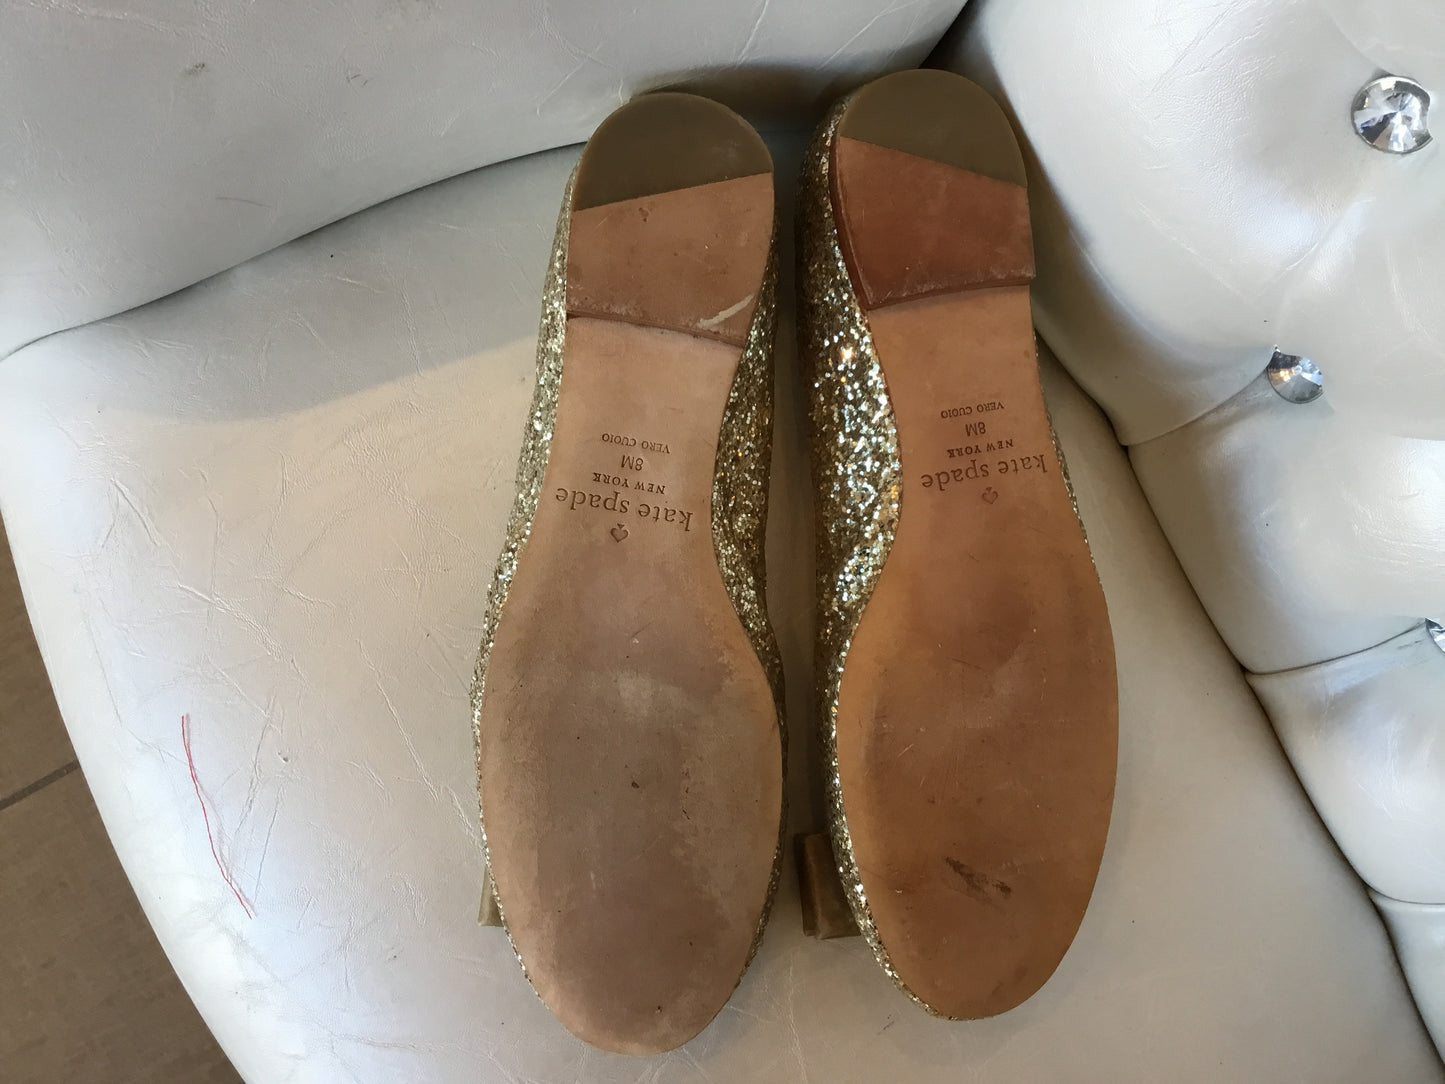 KATE SPADE GOLD BOW BALLET FLATS 8M EXCELLENT USED CONDITION